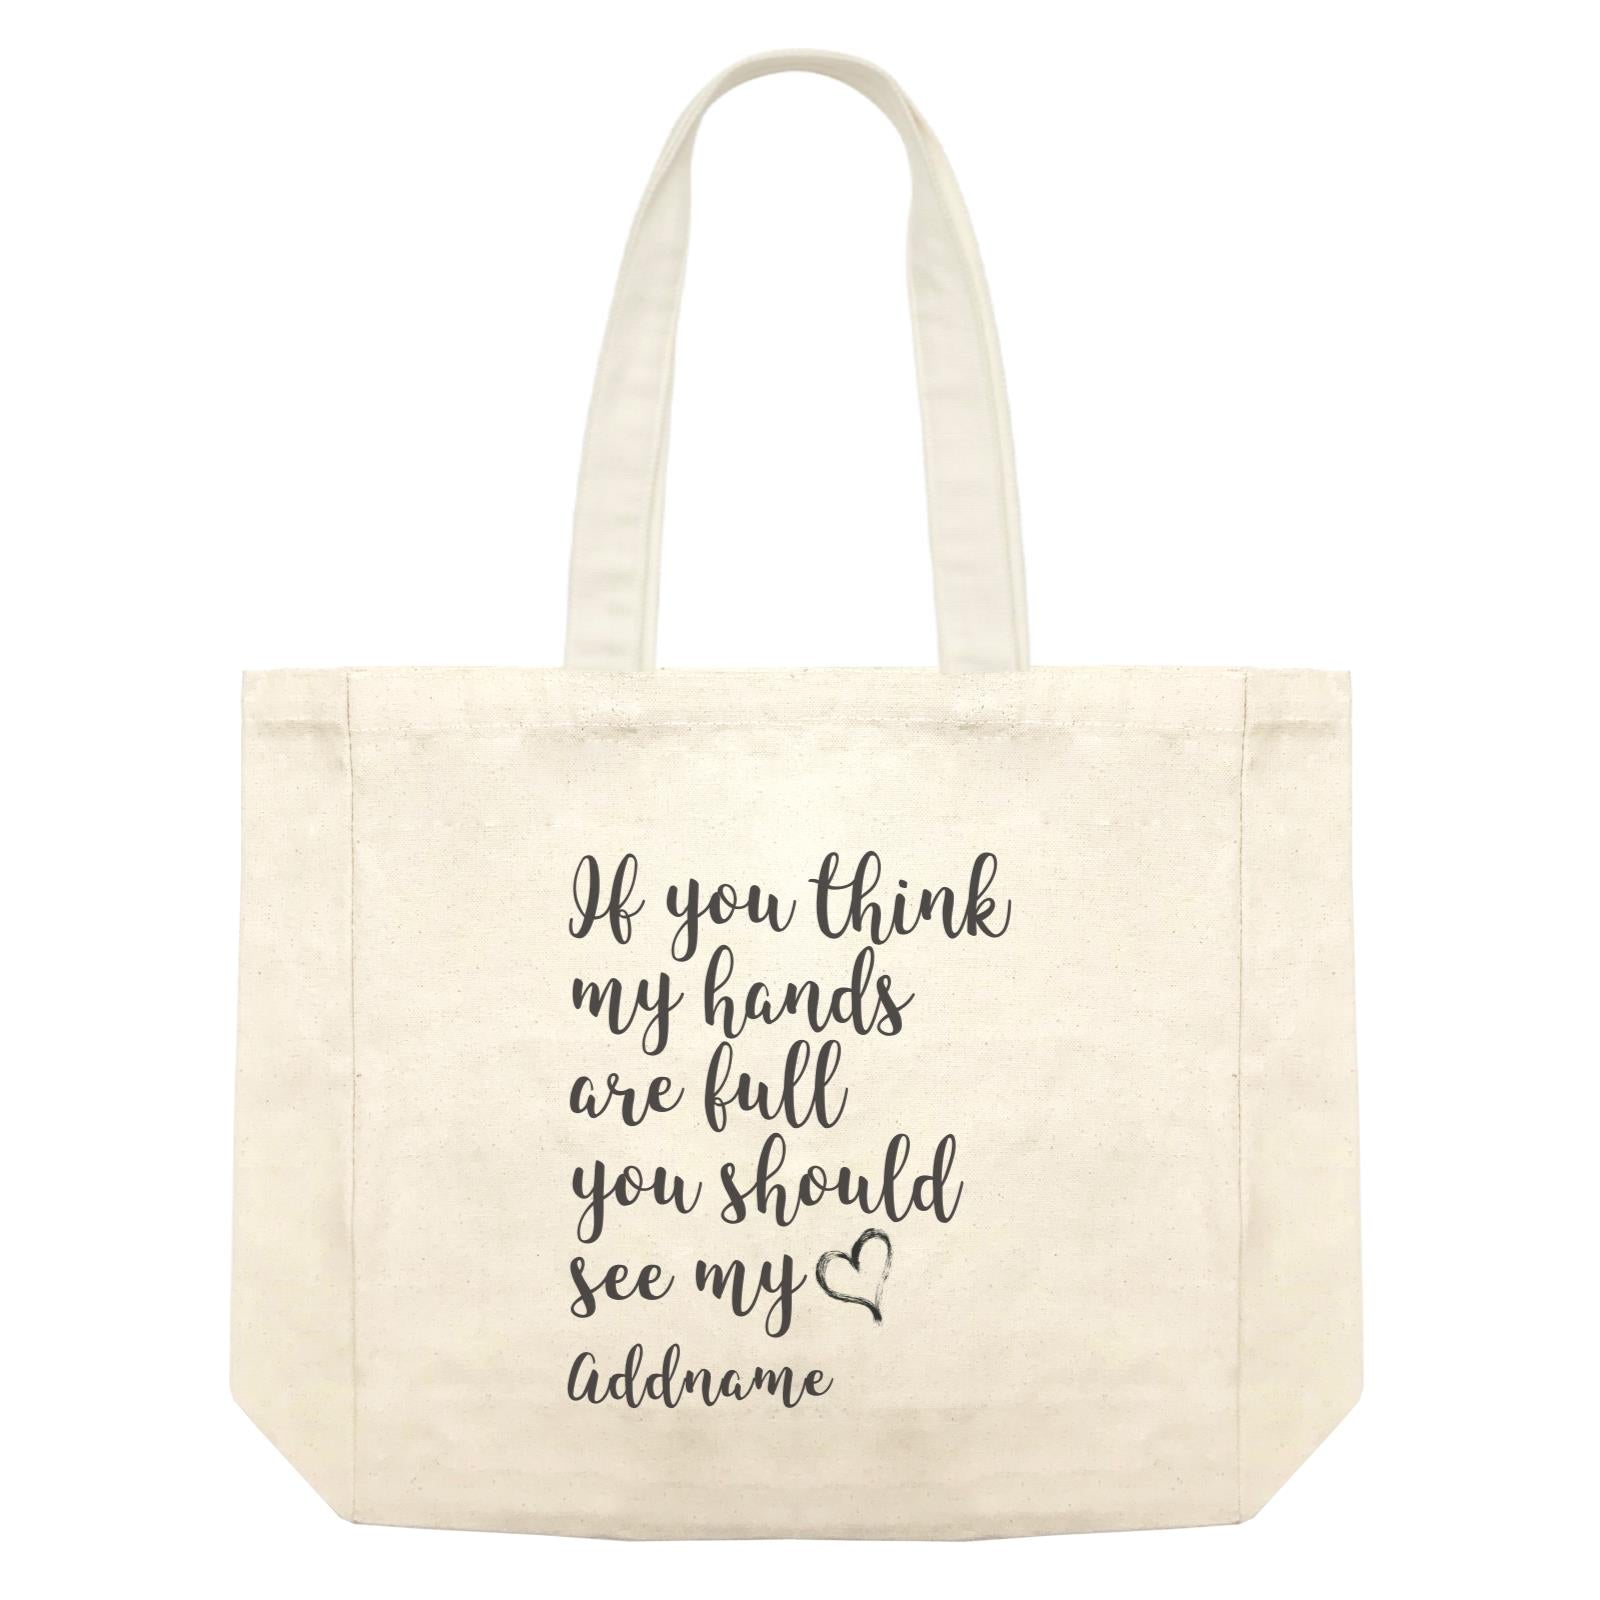 Family Is Everythings Quotes It You Think My Hands Are Full You Should See My Love Addname Shopping Bag